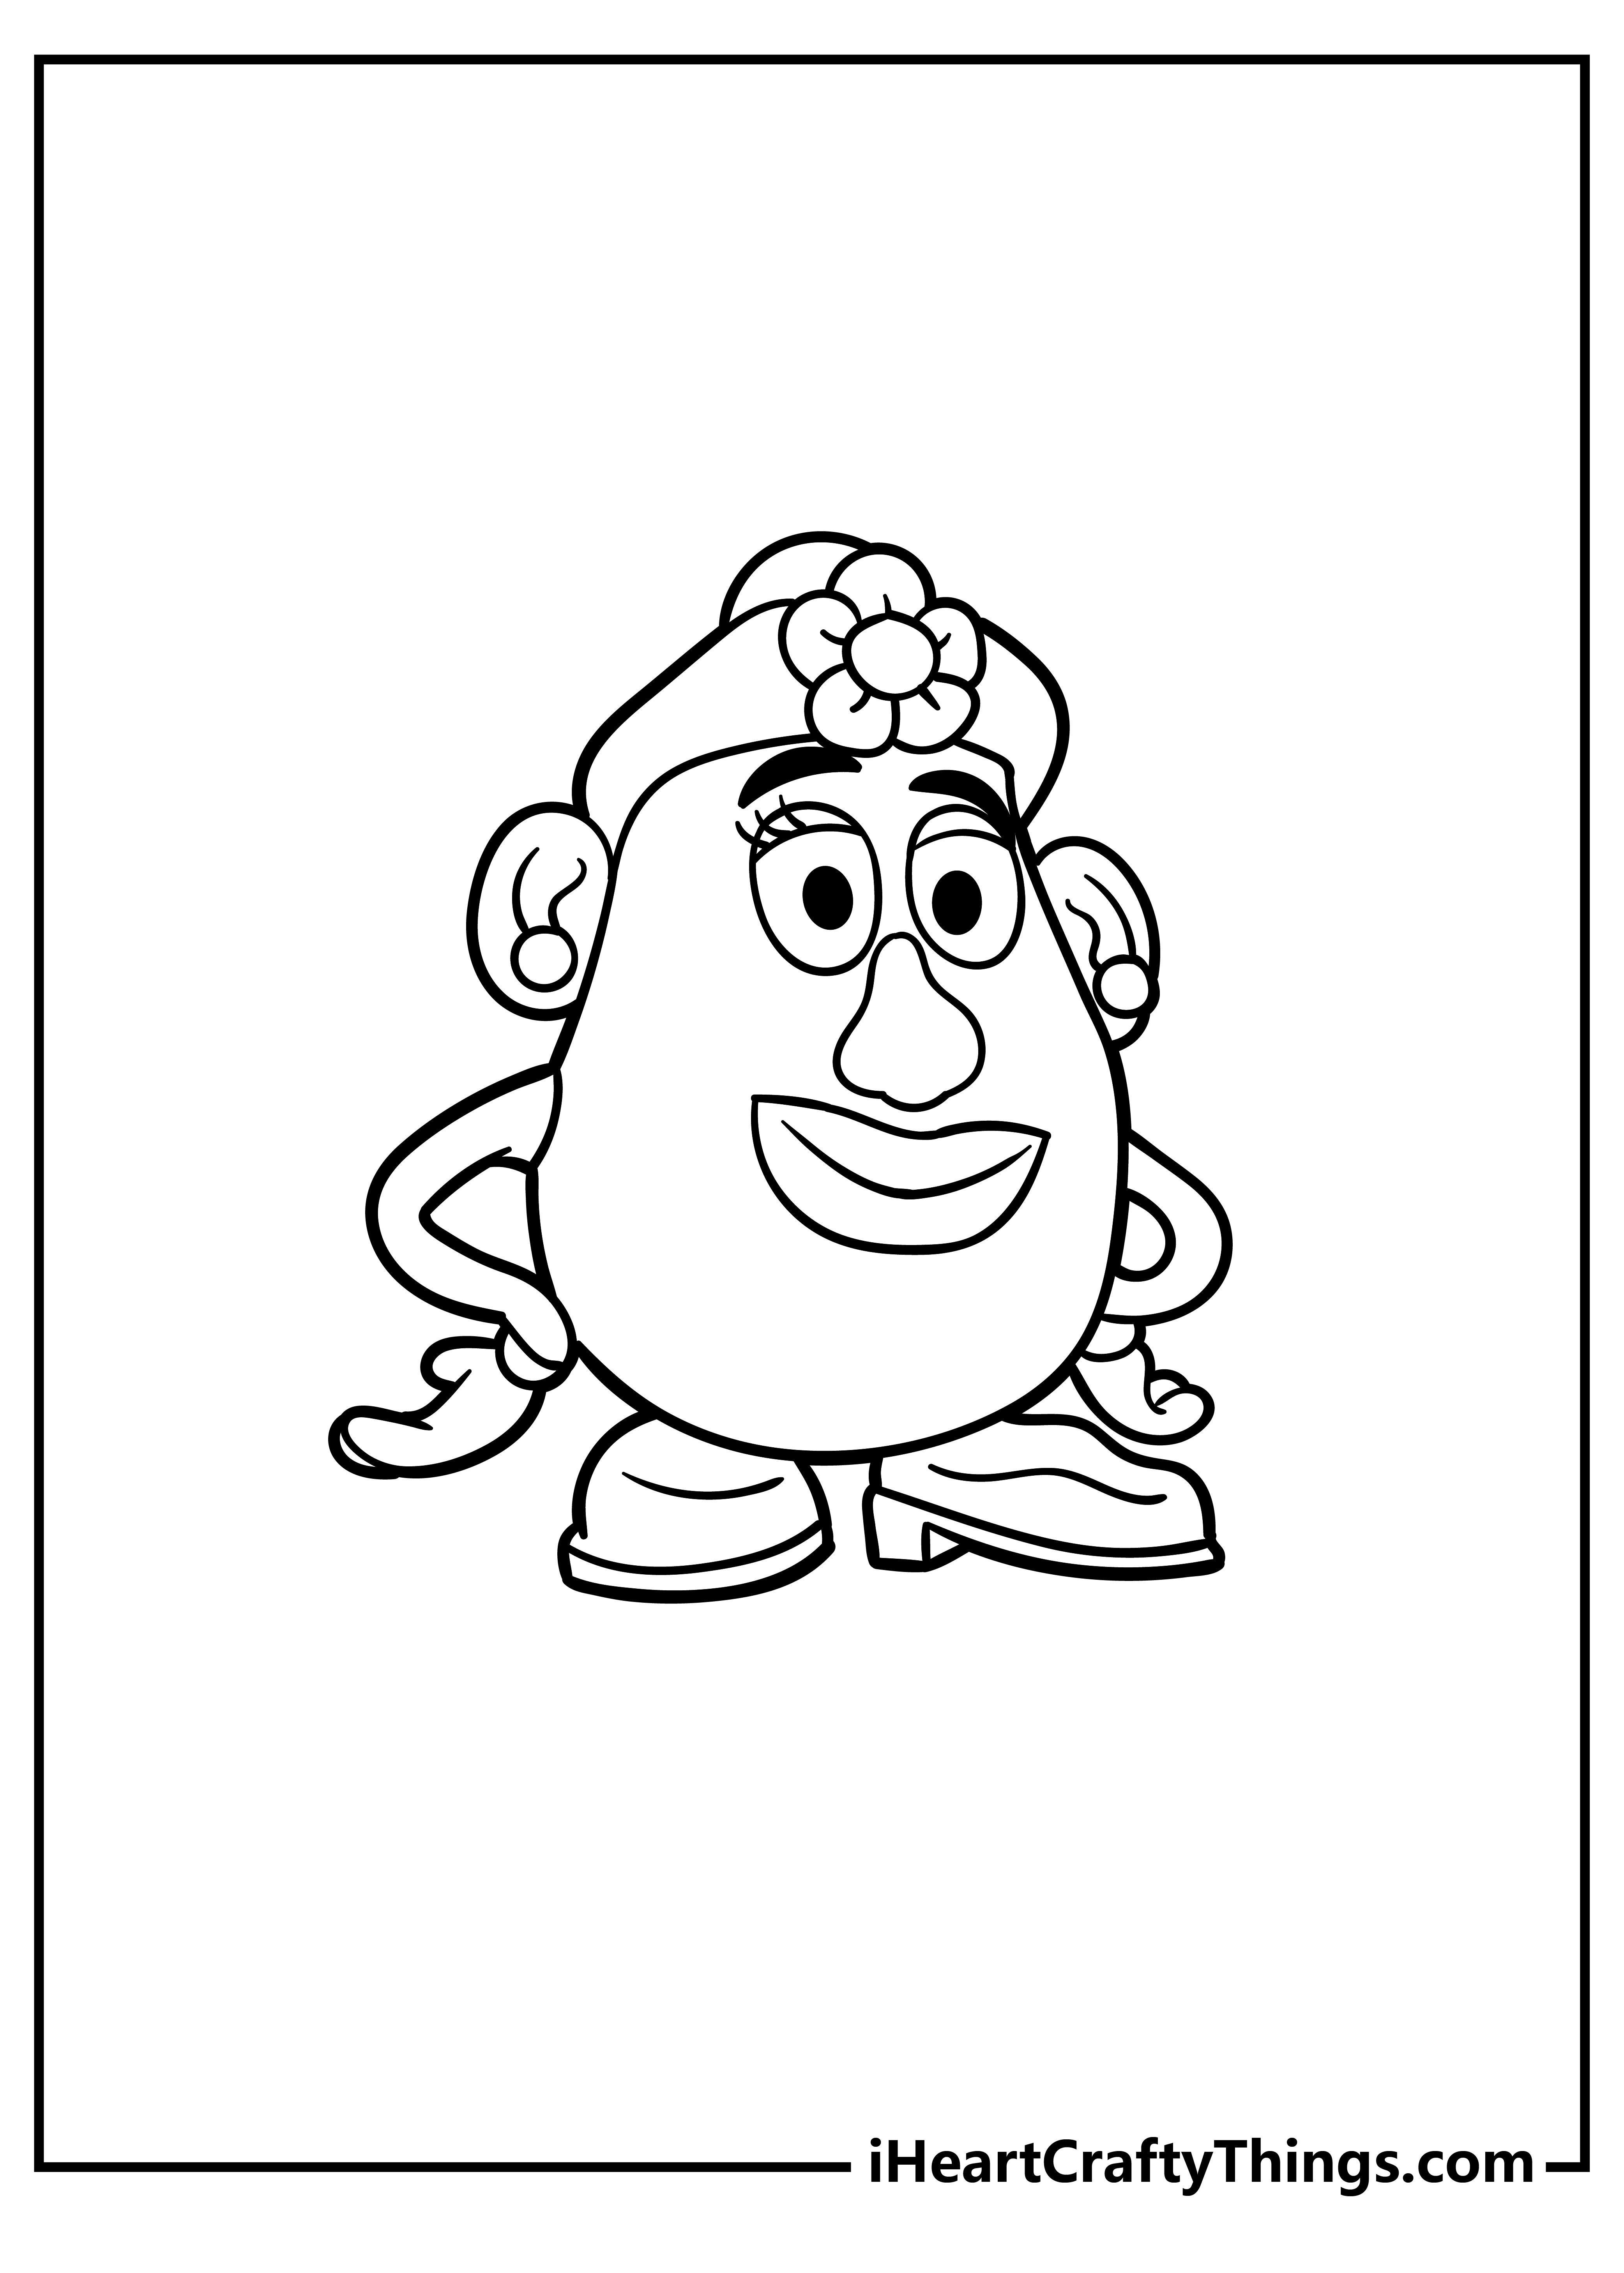 Toy Story Coloring Pages free pdf download